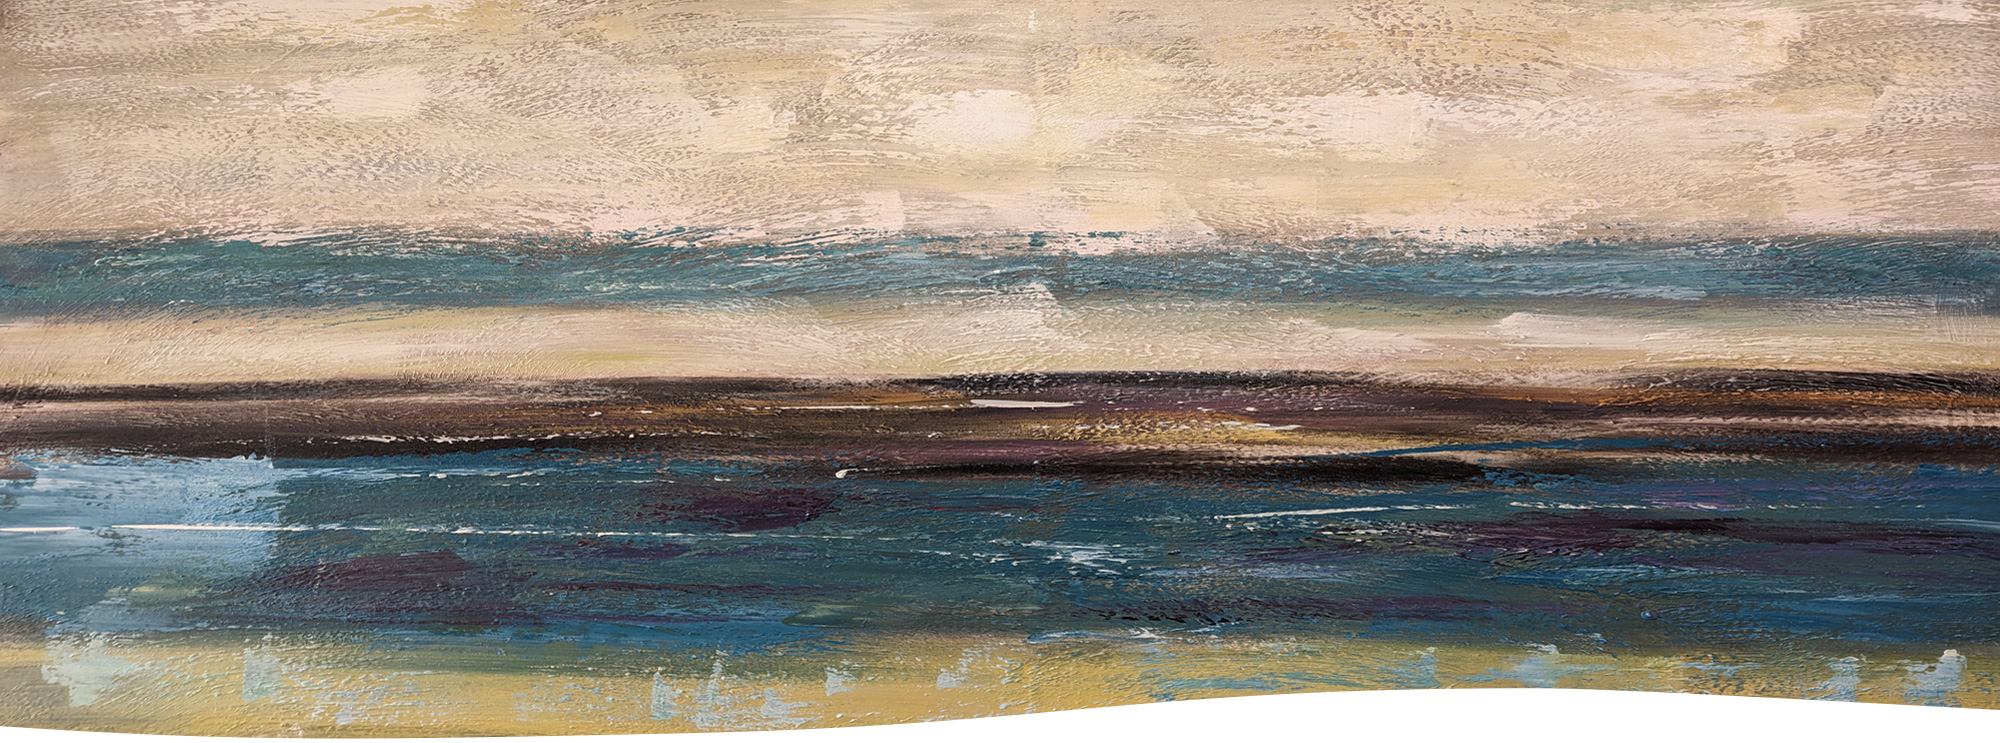 Background image for home page. Painting of multiple horizontal but not even lines of colors. Could be view of a horizon over a beach and ocean.